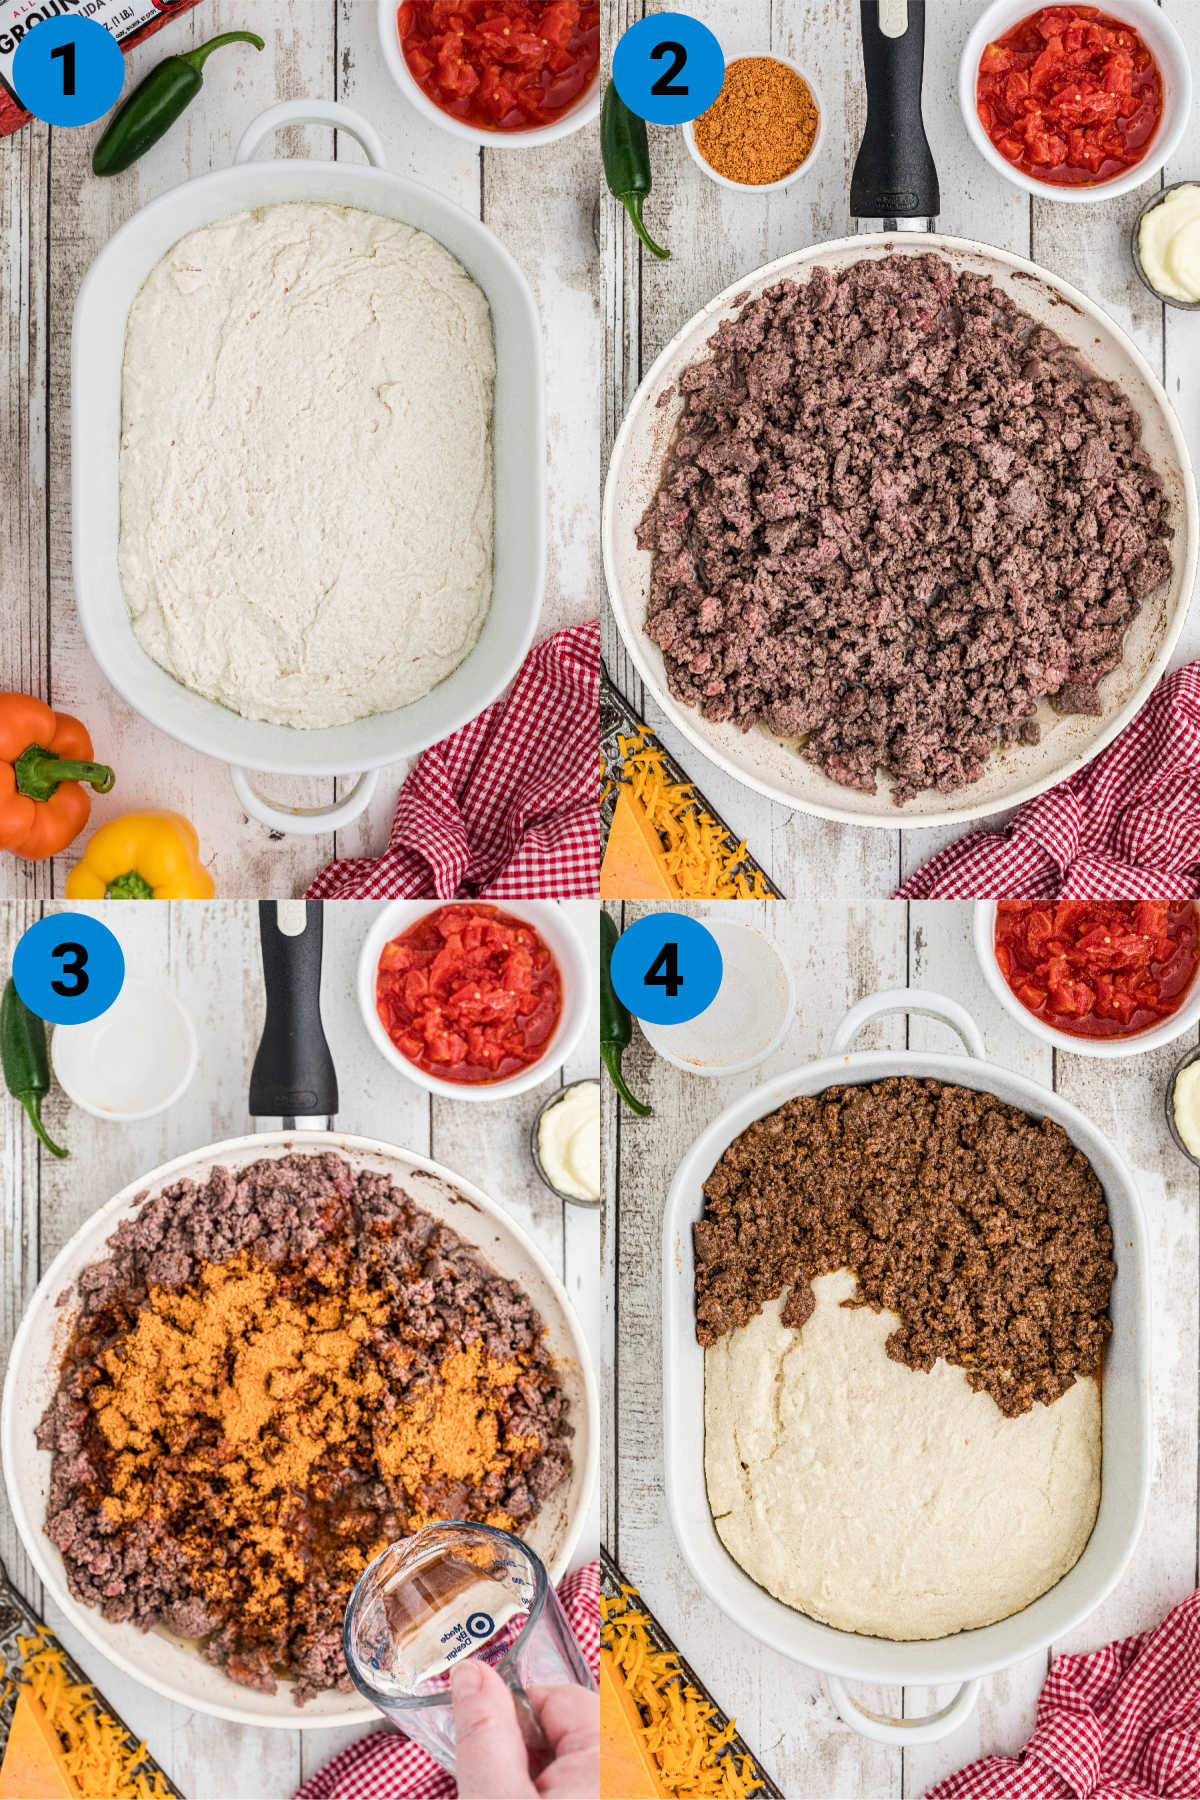 A collage of four images showing how to make a John Wayne Casserole, steps 1 through 4.